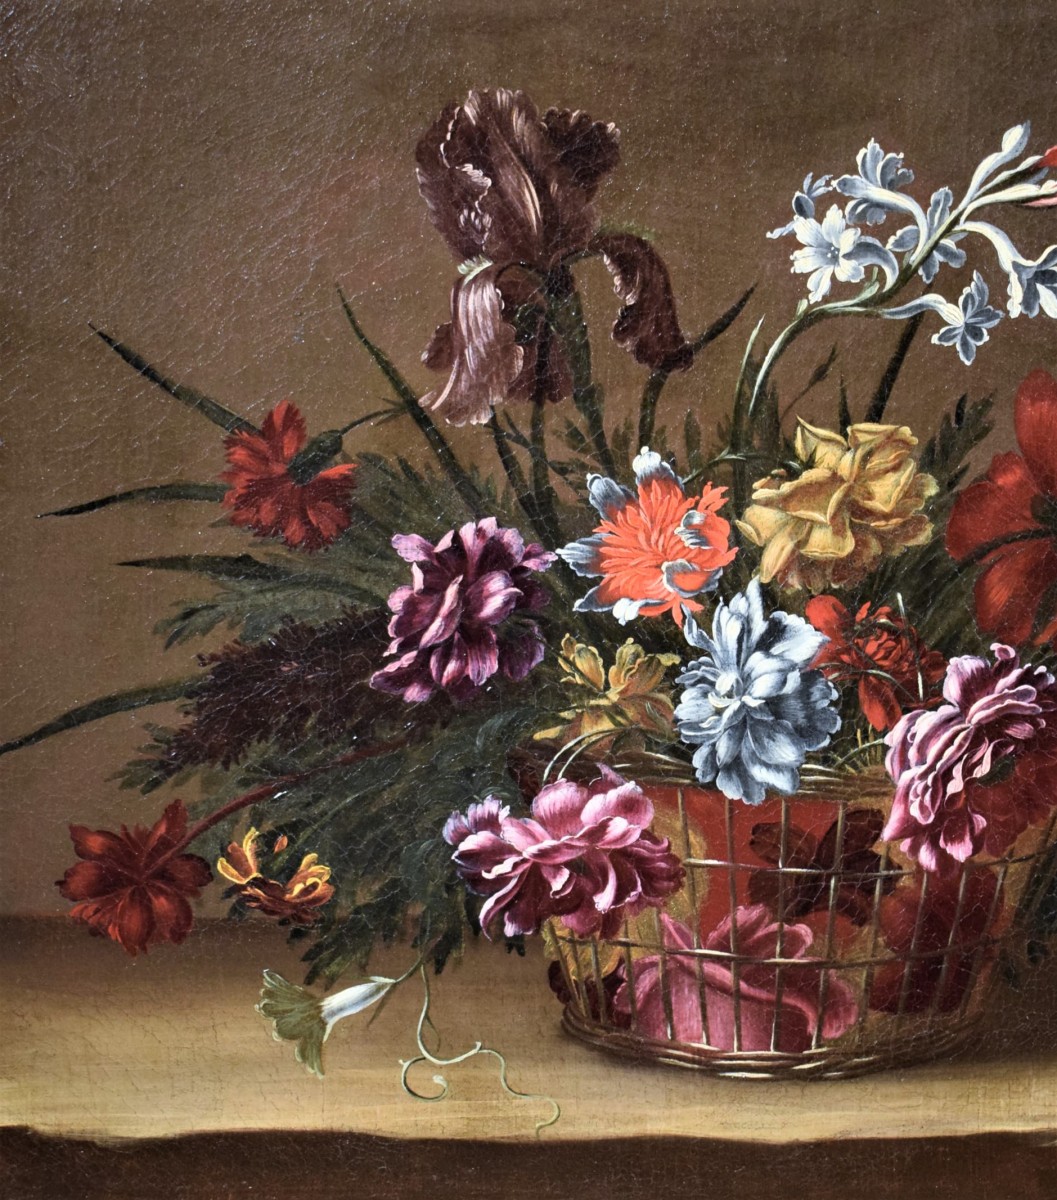 Flowers Mutate into Peculiar Blossoms in 18th-Century-Style Paintings by  Laurent Grasso — Colossal